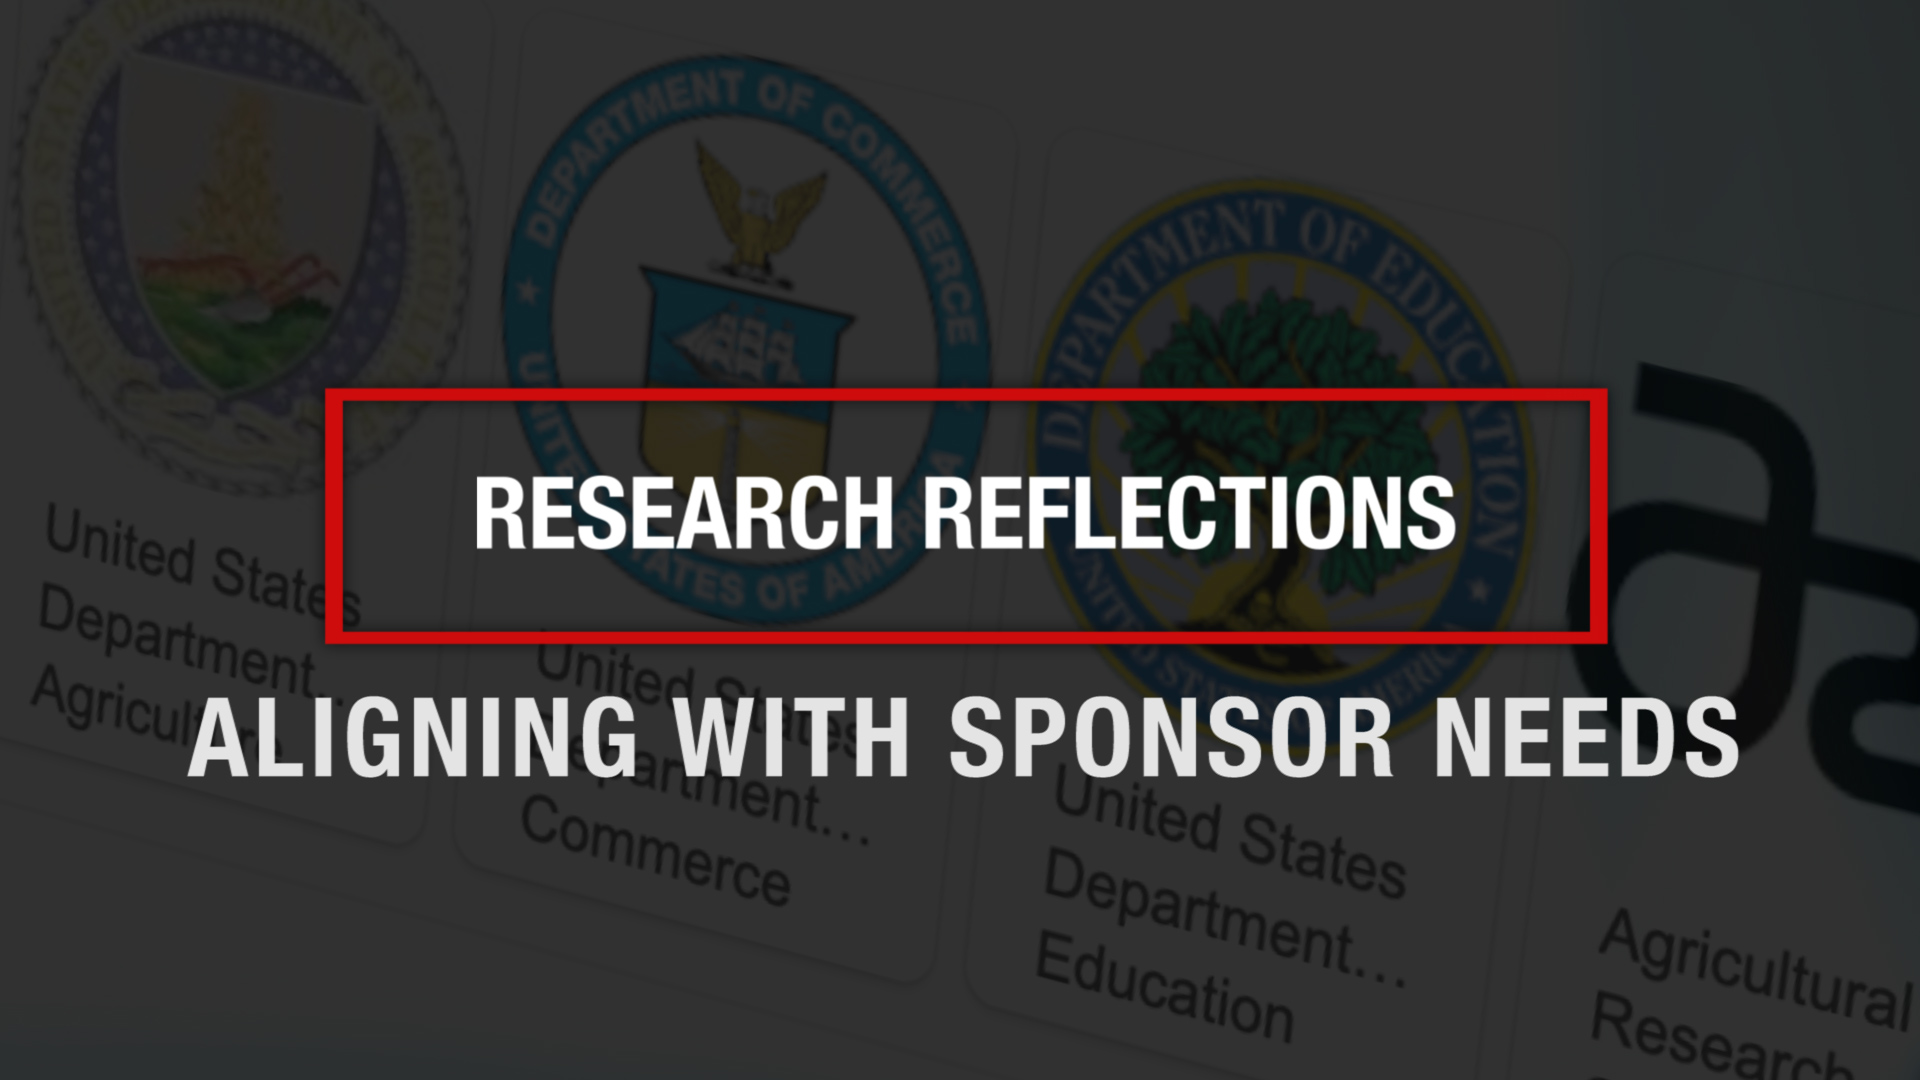 Text of "Research Reflections: Aligning with Sponsor Needs" superimposed over an image of funding agency logos on a website.